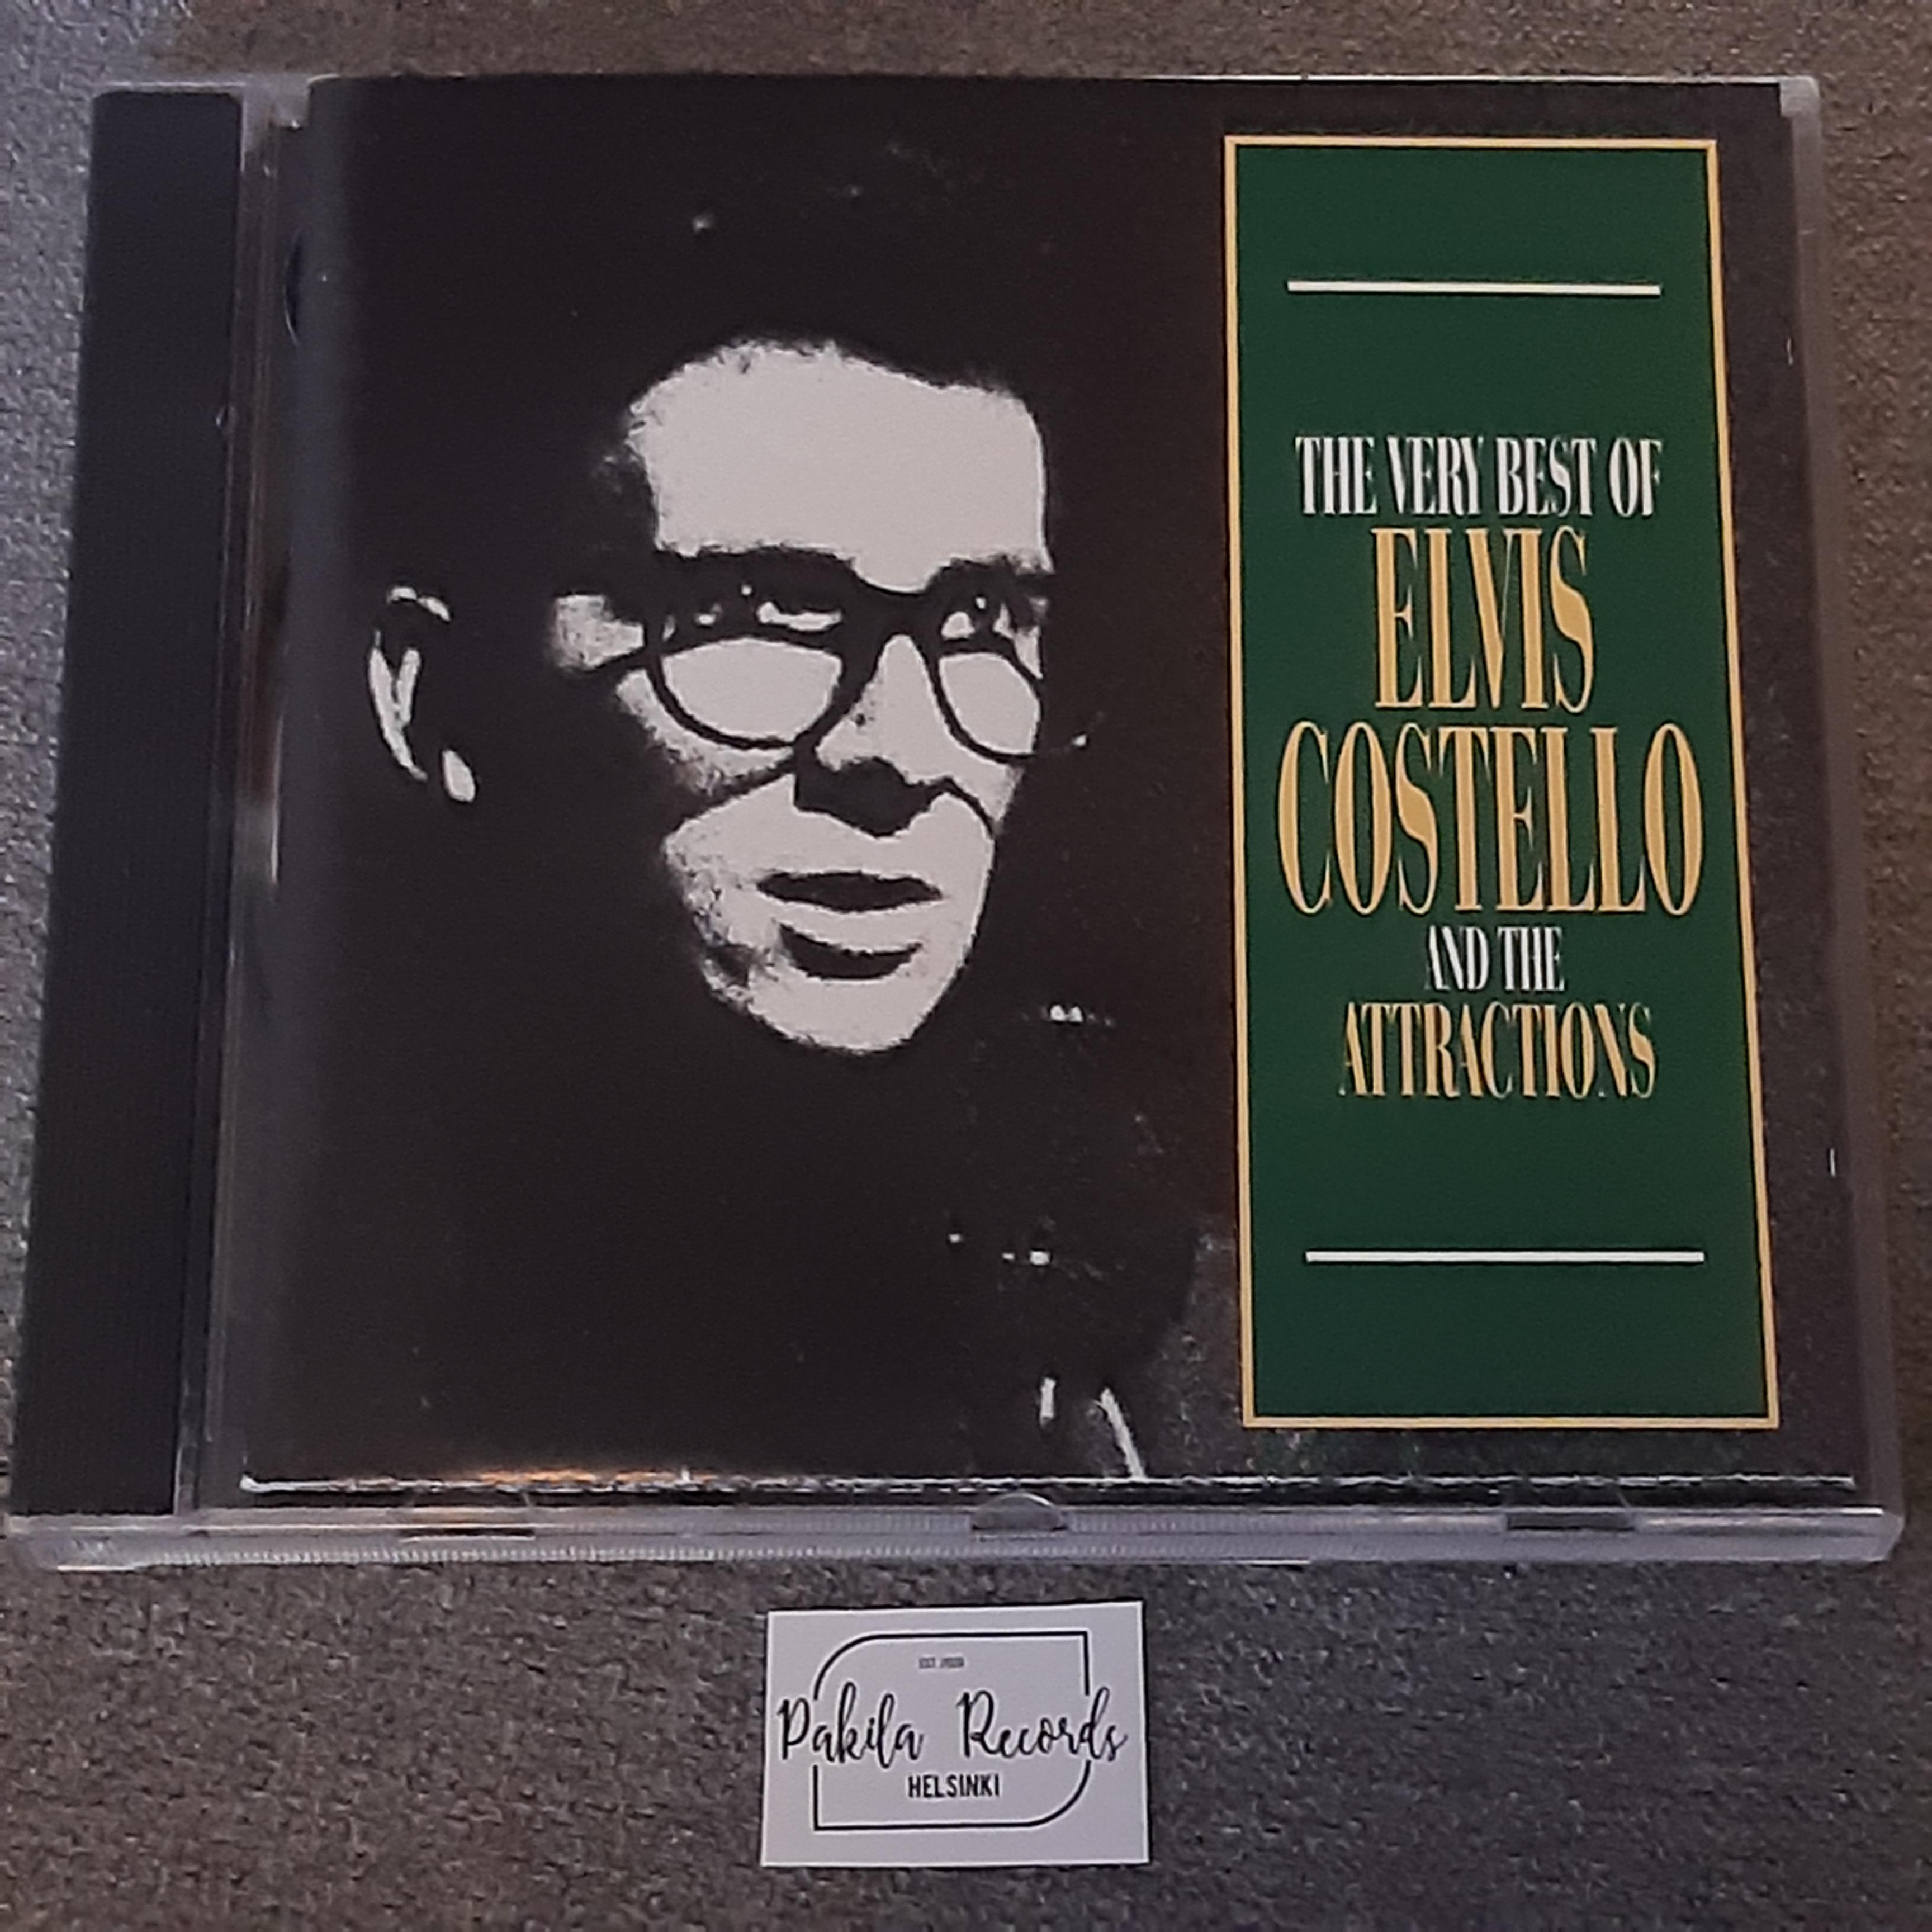 Elvis Costello And The Attractions - The Very Best Of - CD (käytetty)